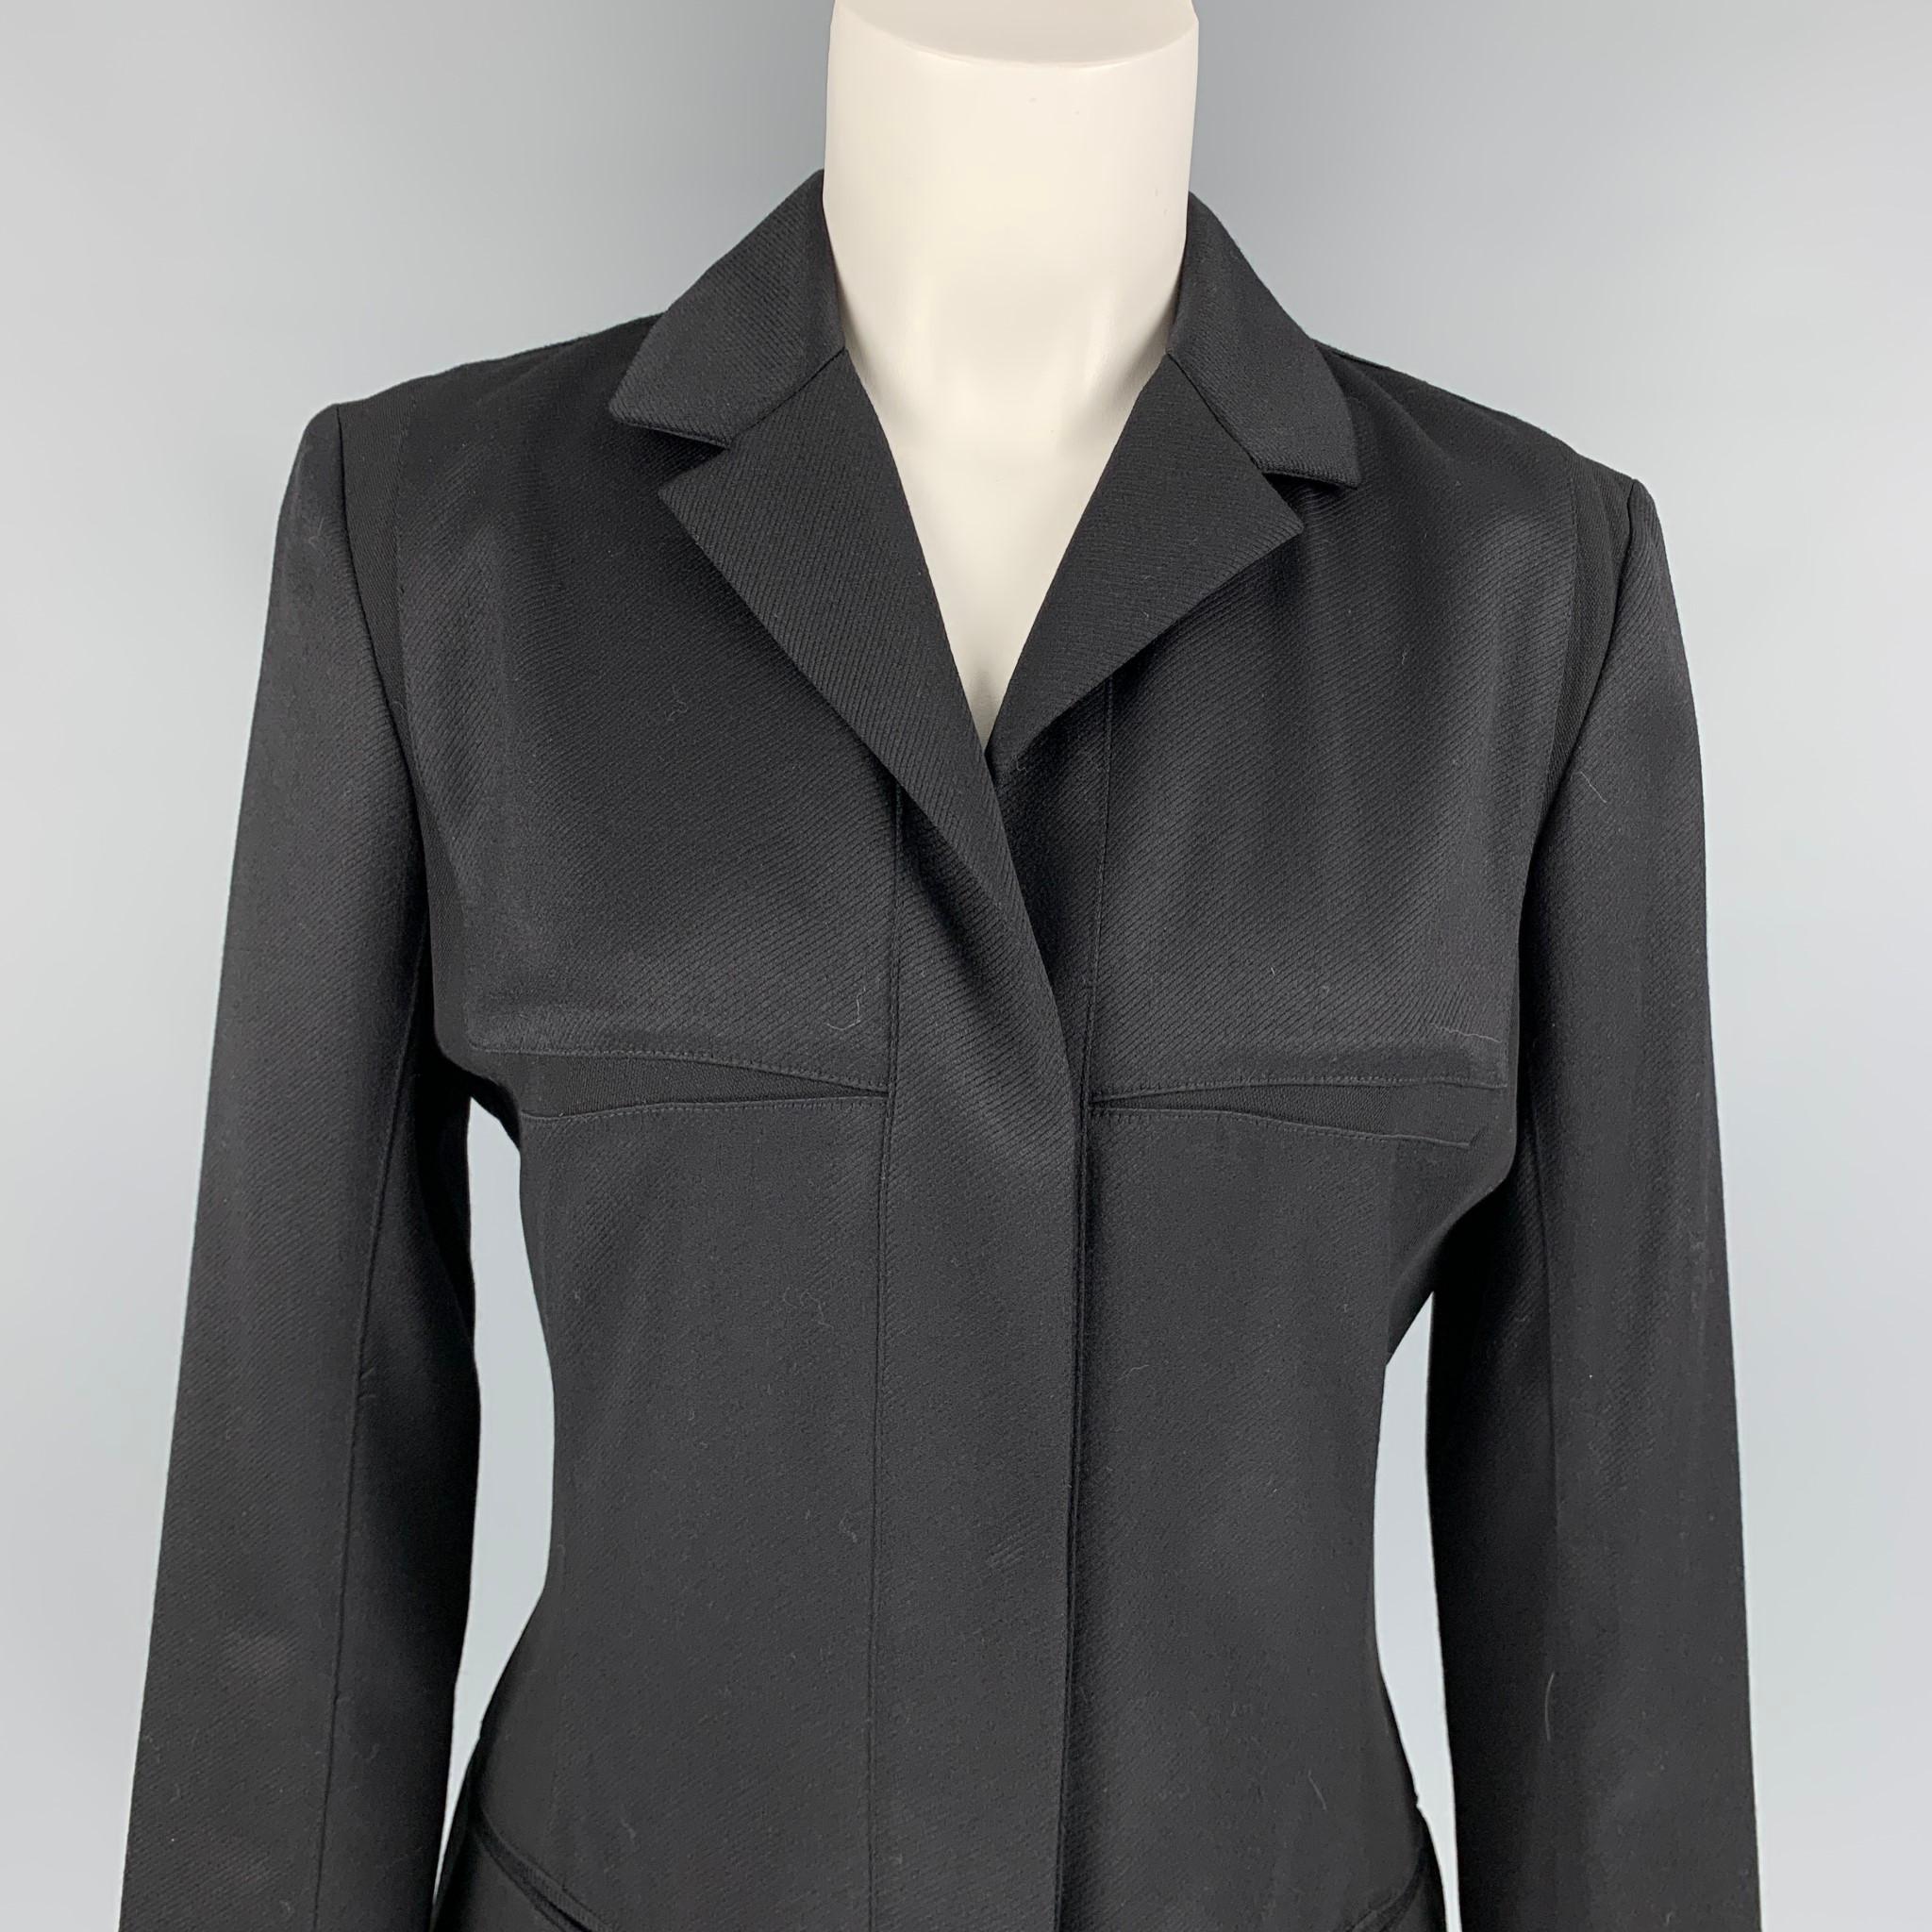 NARCISO RODRIGUEZ jacket comes in a black textured virgin wool / silk featuring a notch lapel, slit pockets, and a zip & snap button closure. 

Very Good Pre-Owned Condition.
Marked: I 42 / F 38 / D 38 / GB 10 / US 6

Measurements:

Shoulder: 15.5